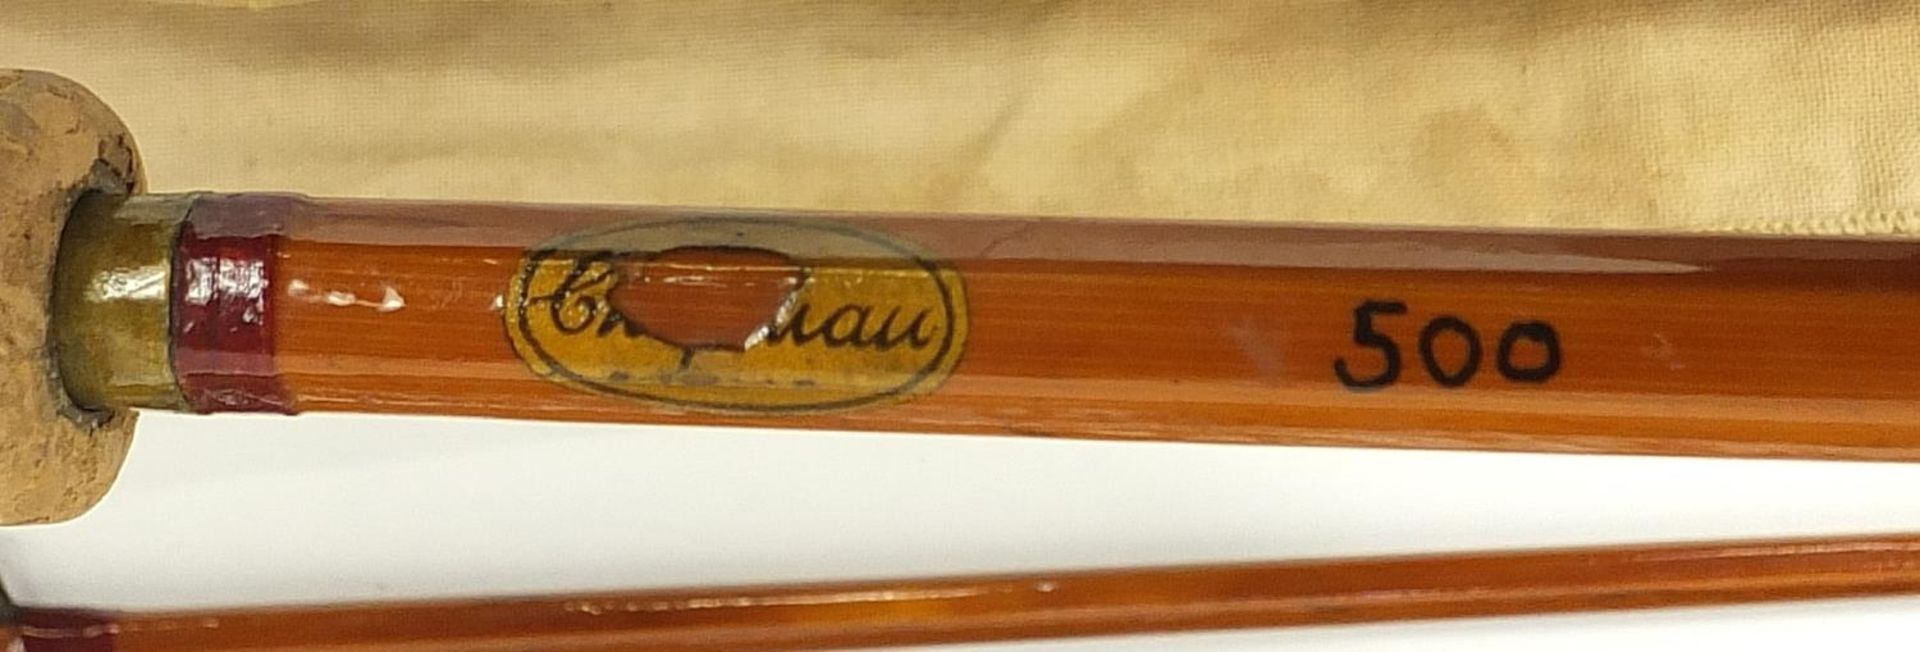 Four vintage Hardy split cane fishing rods and Chapman 500 comprising Hardy Palakona Triumph, - Image 4 of 10